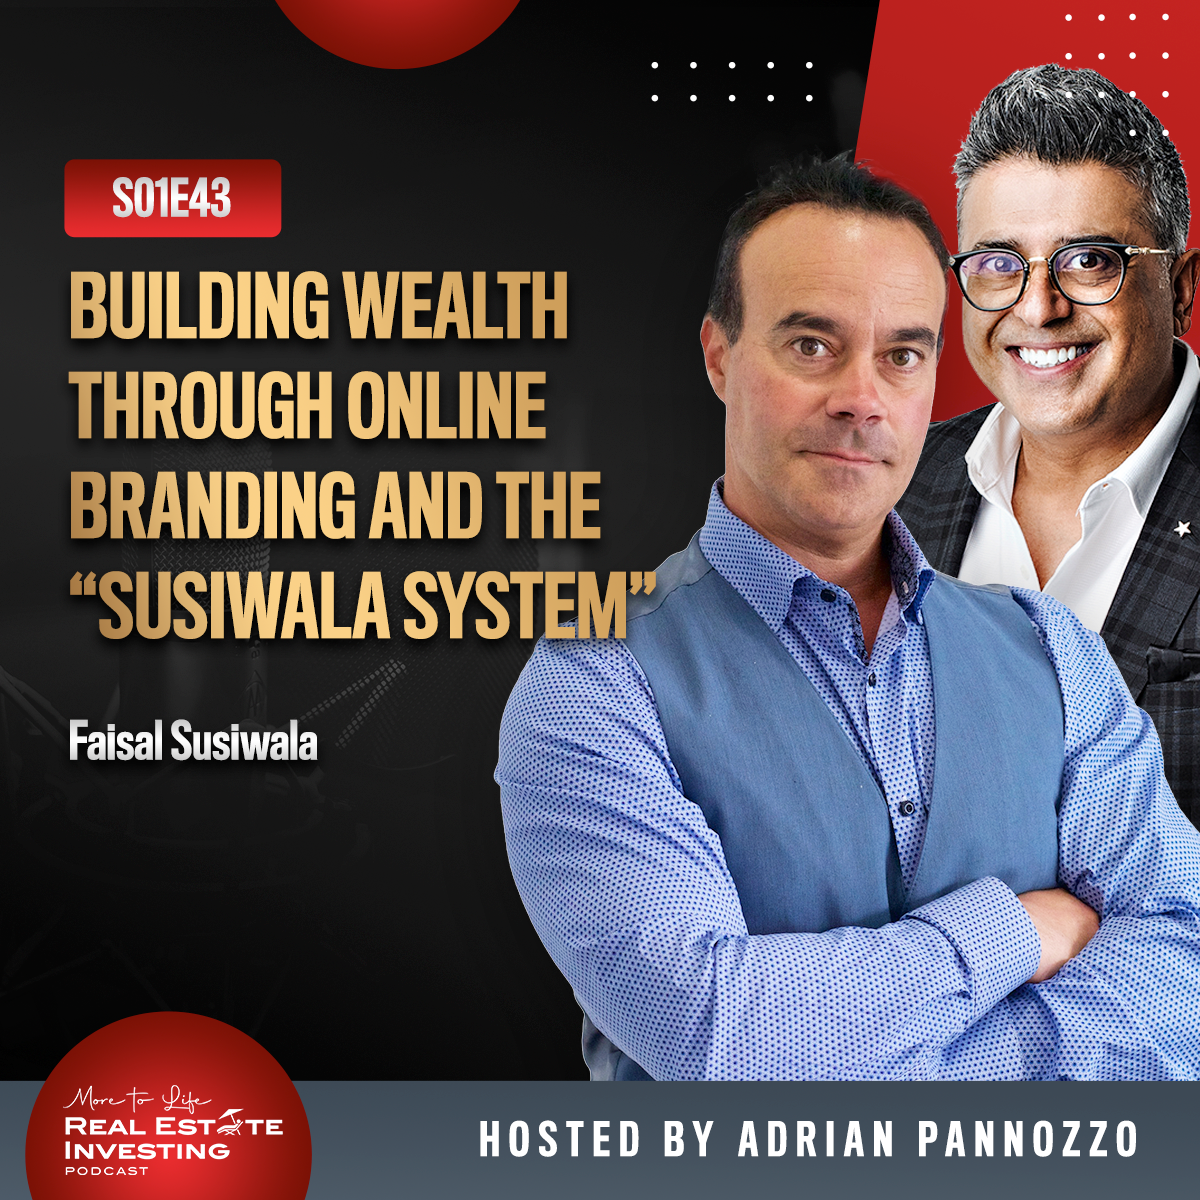 Building Wealth Through Online Branding and the "Susiwala System" with Faisal Susiwala